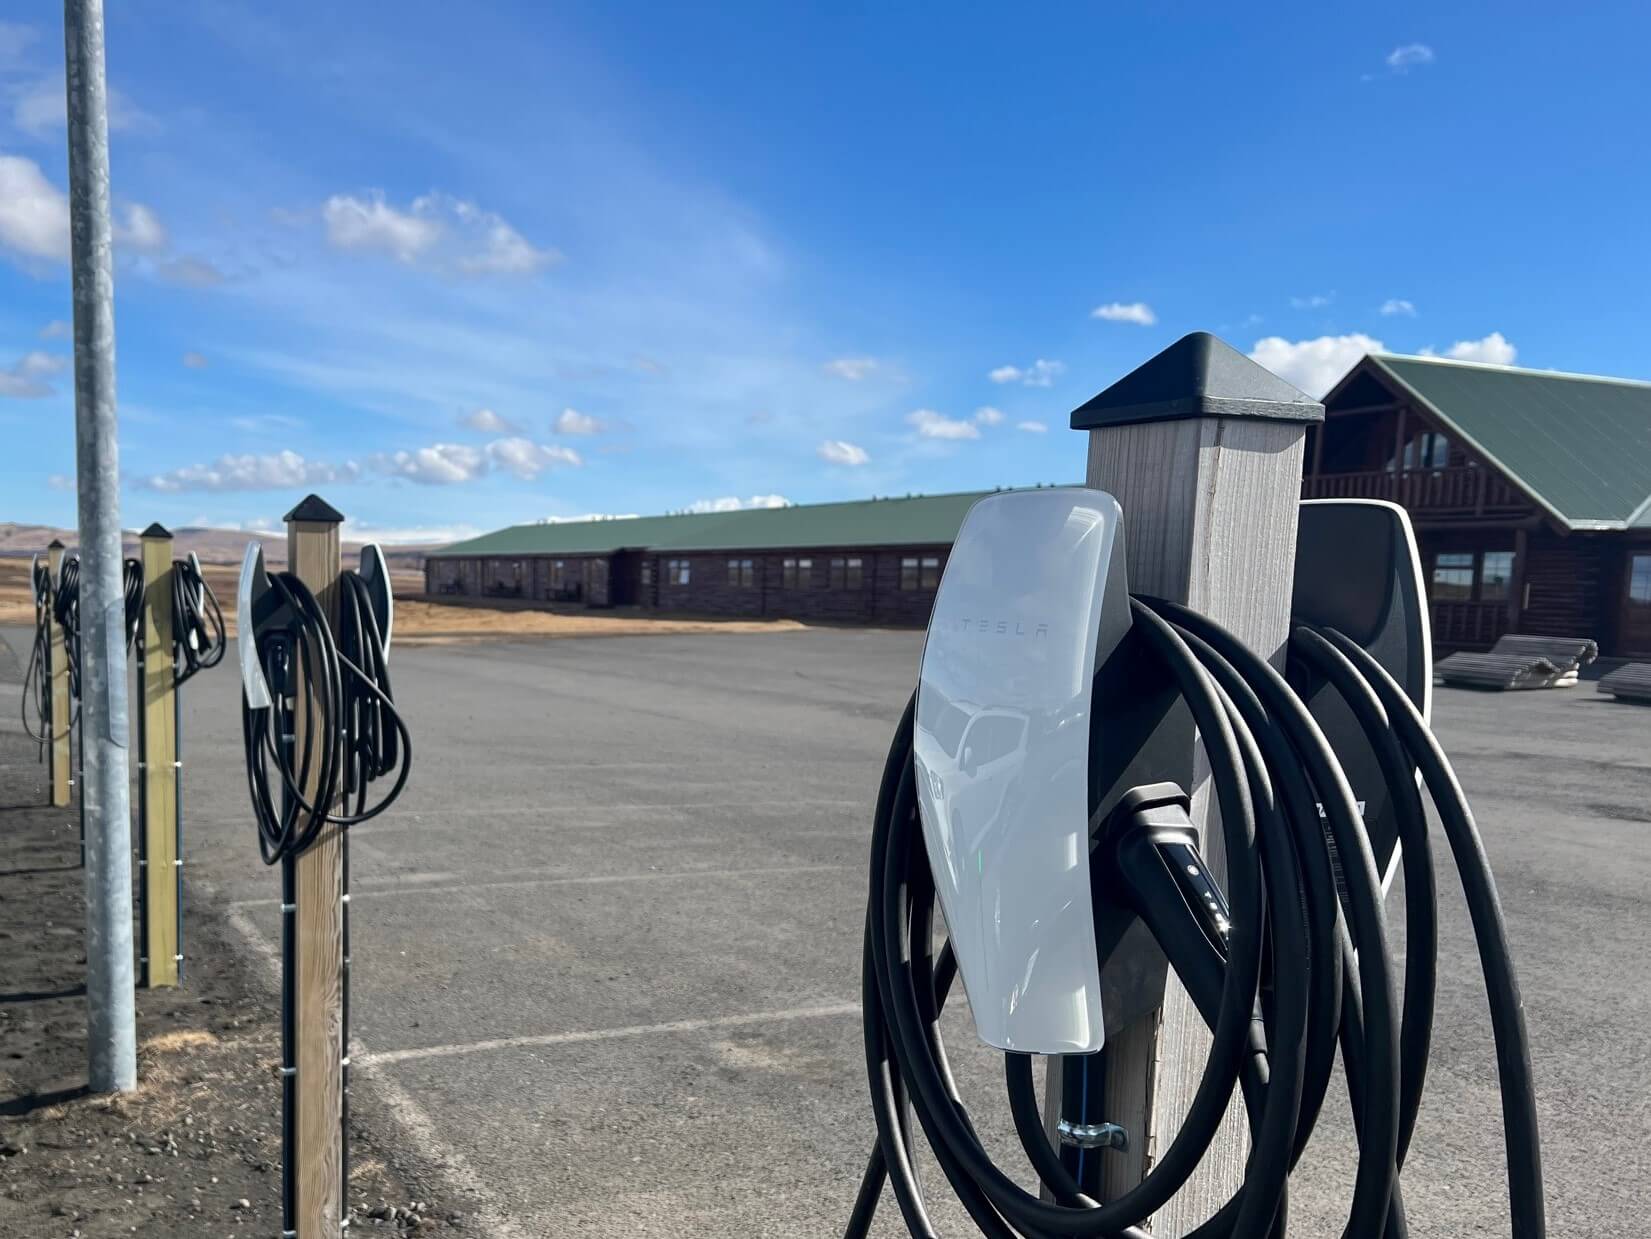 Electric car charging stations free to use for our guests